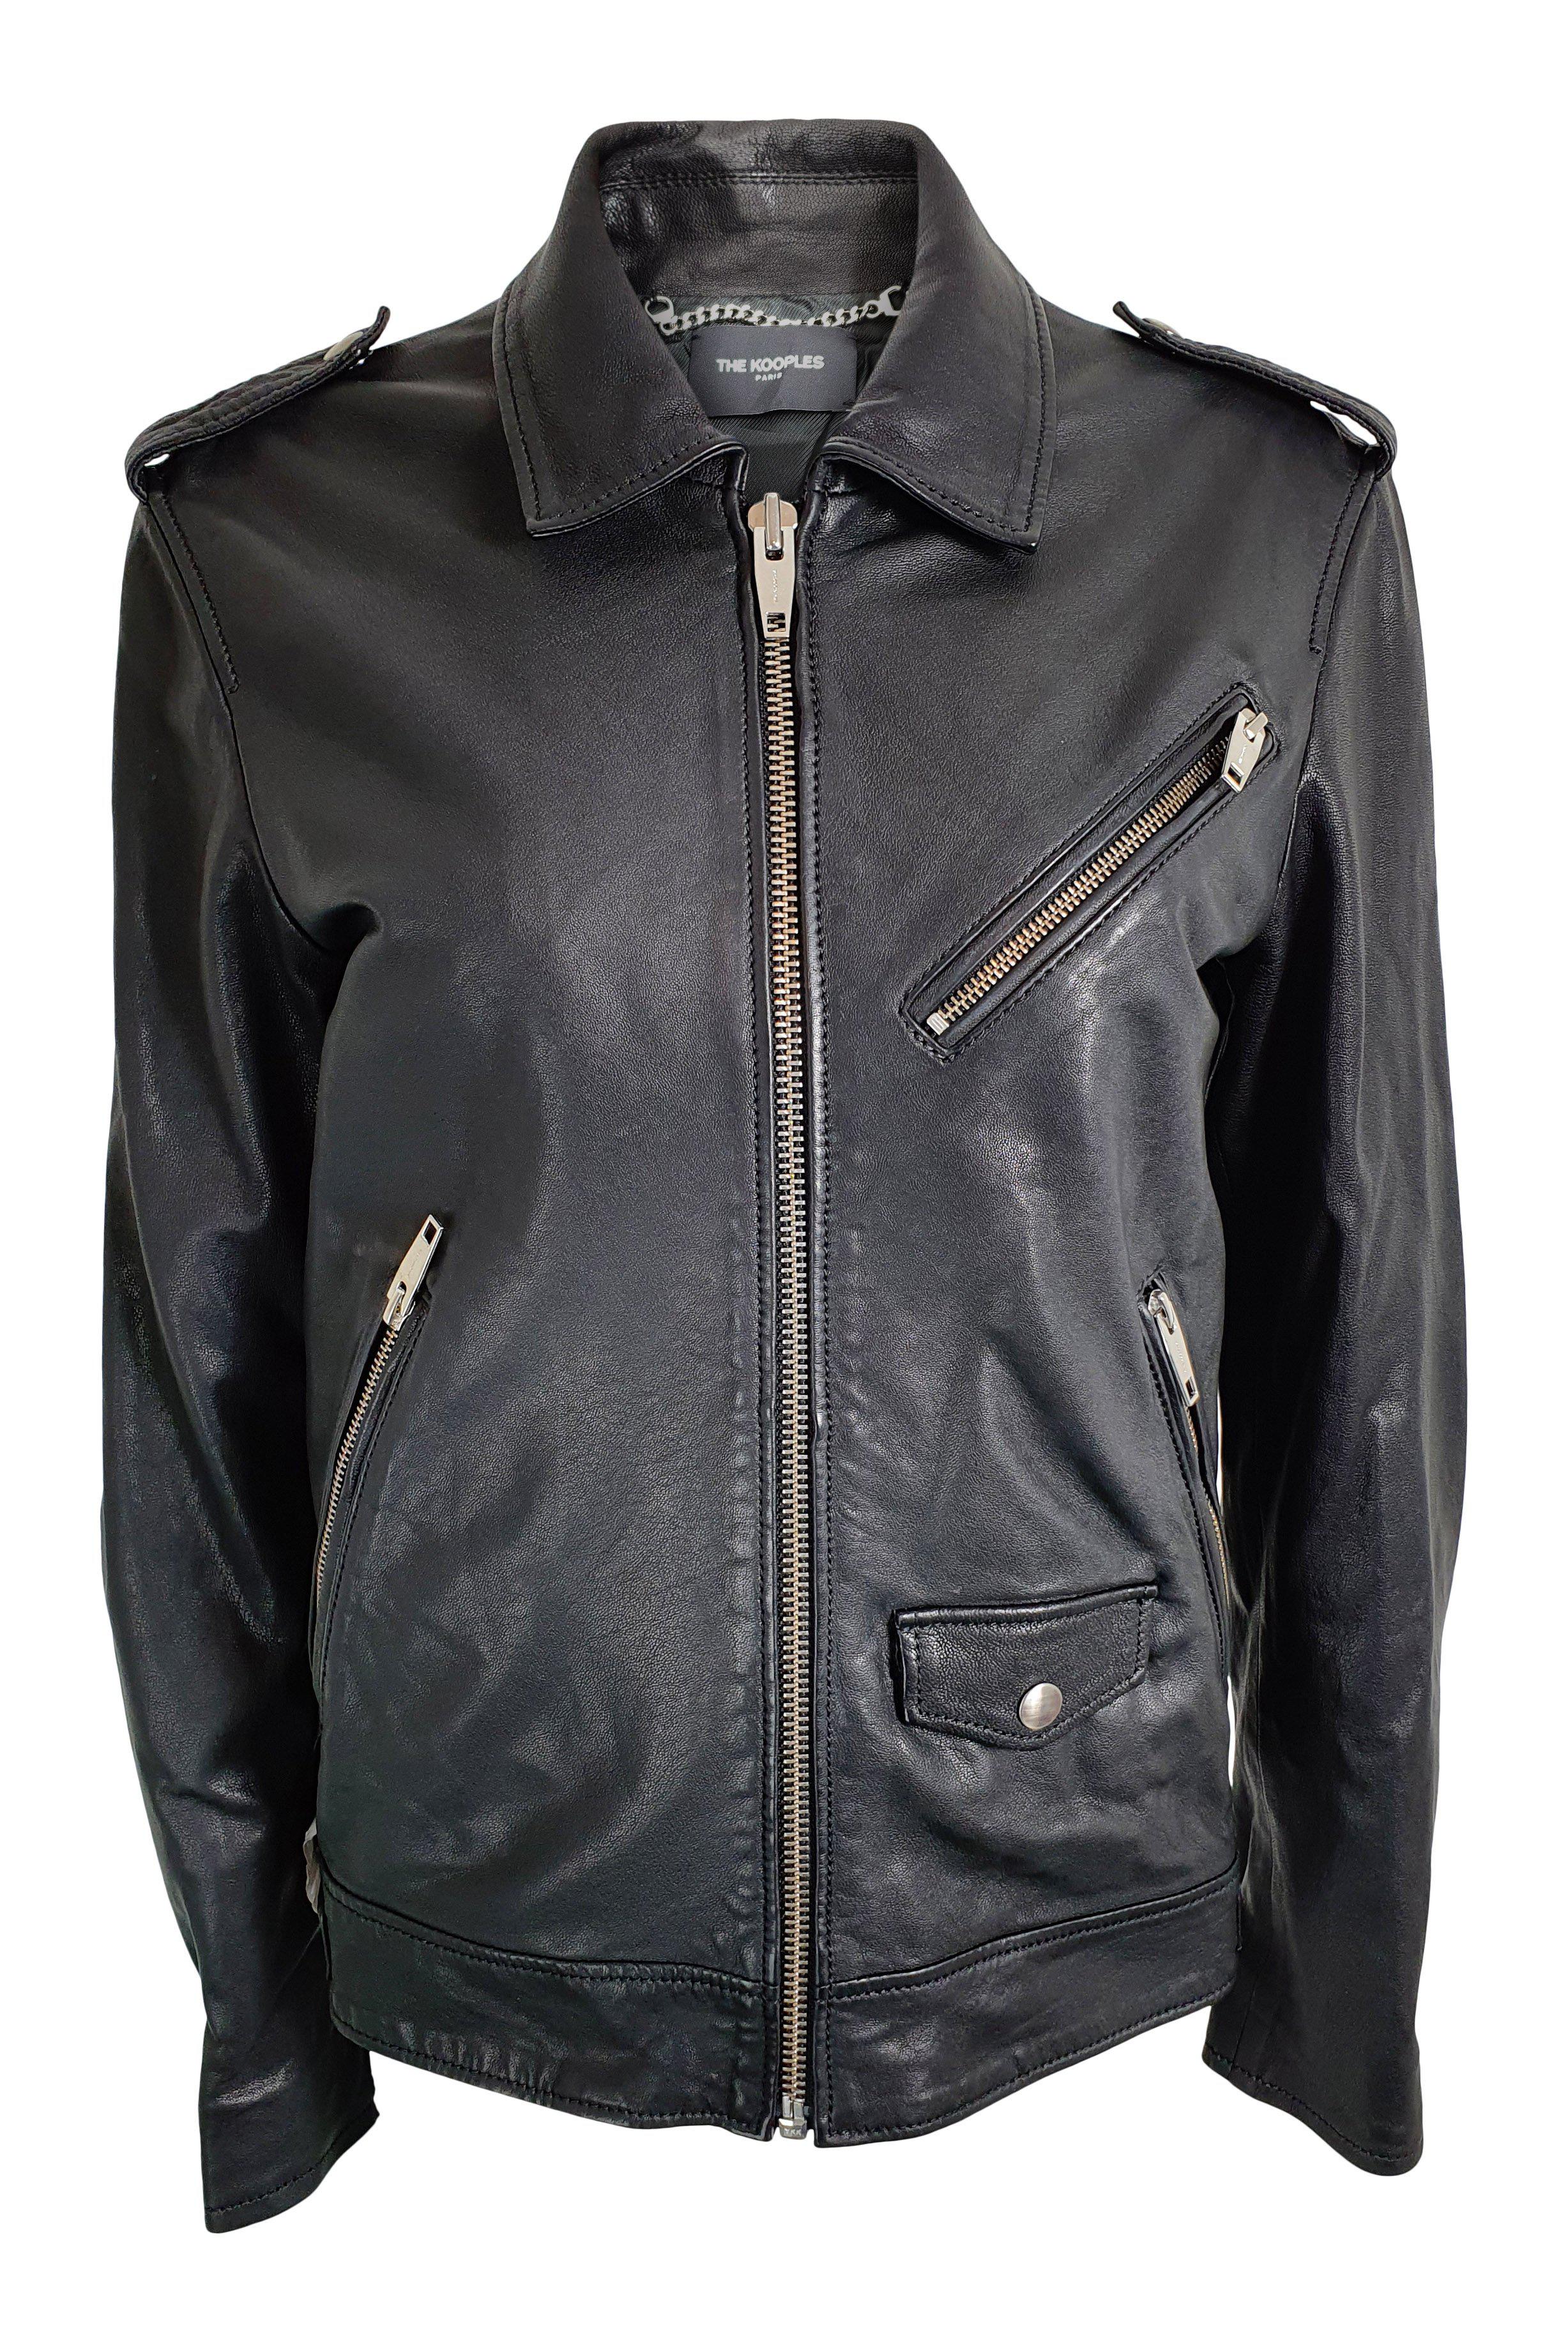 THE KOOPLES Black Washed Lambs Leather Zip Front Biker Jacket (XS)-The Kooples-The Freperie